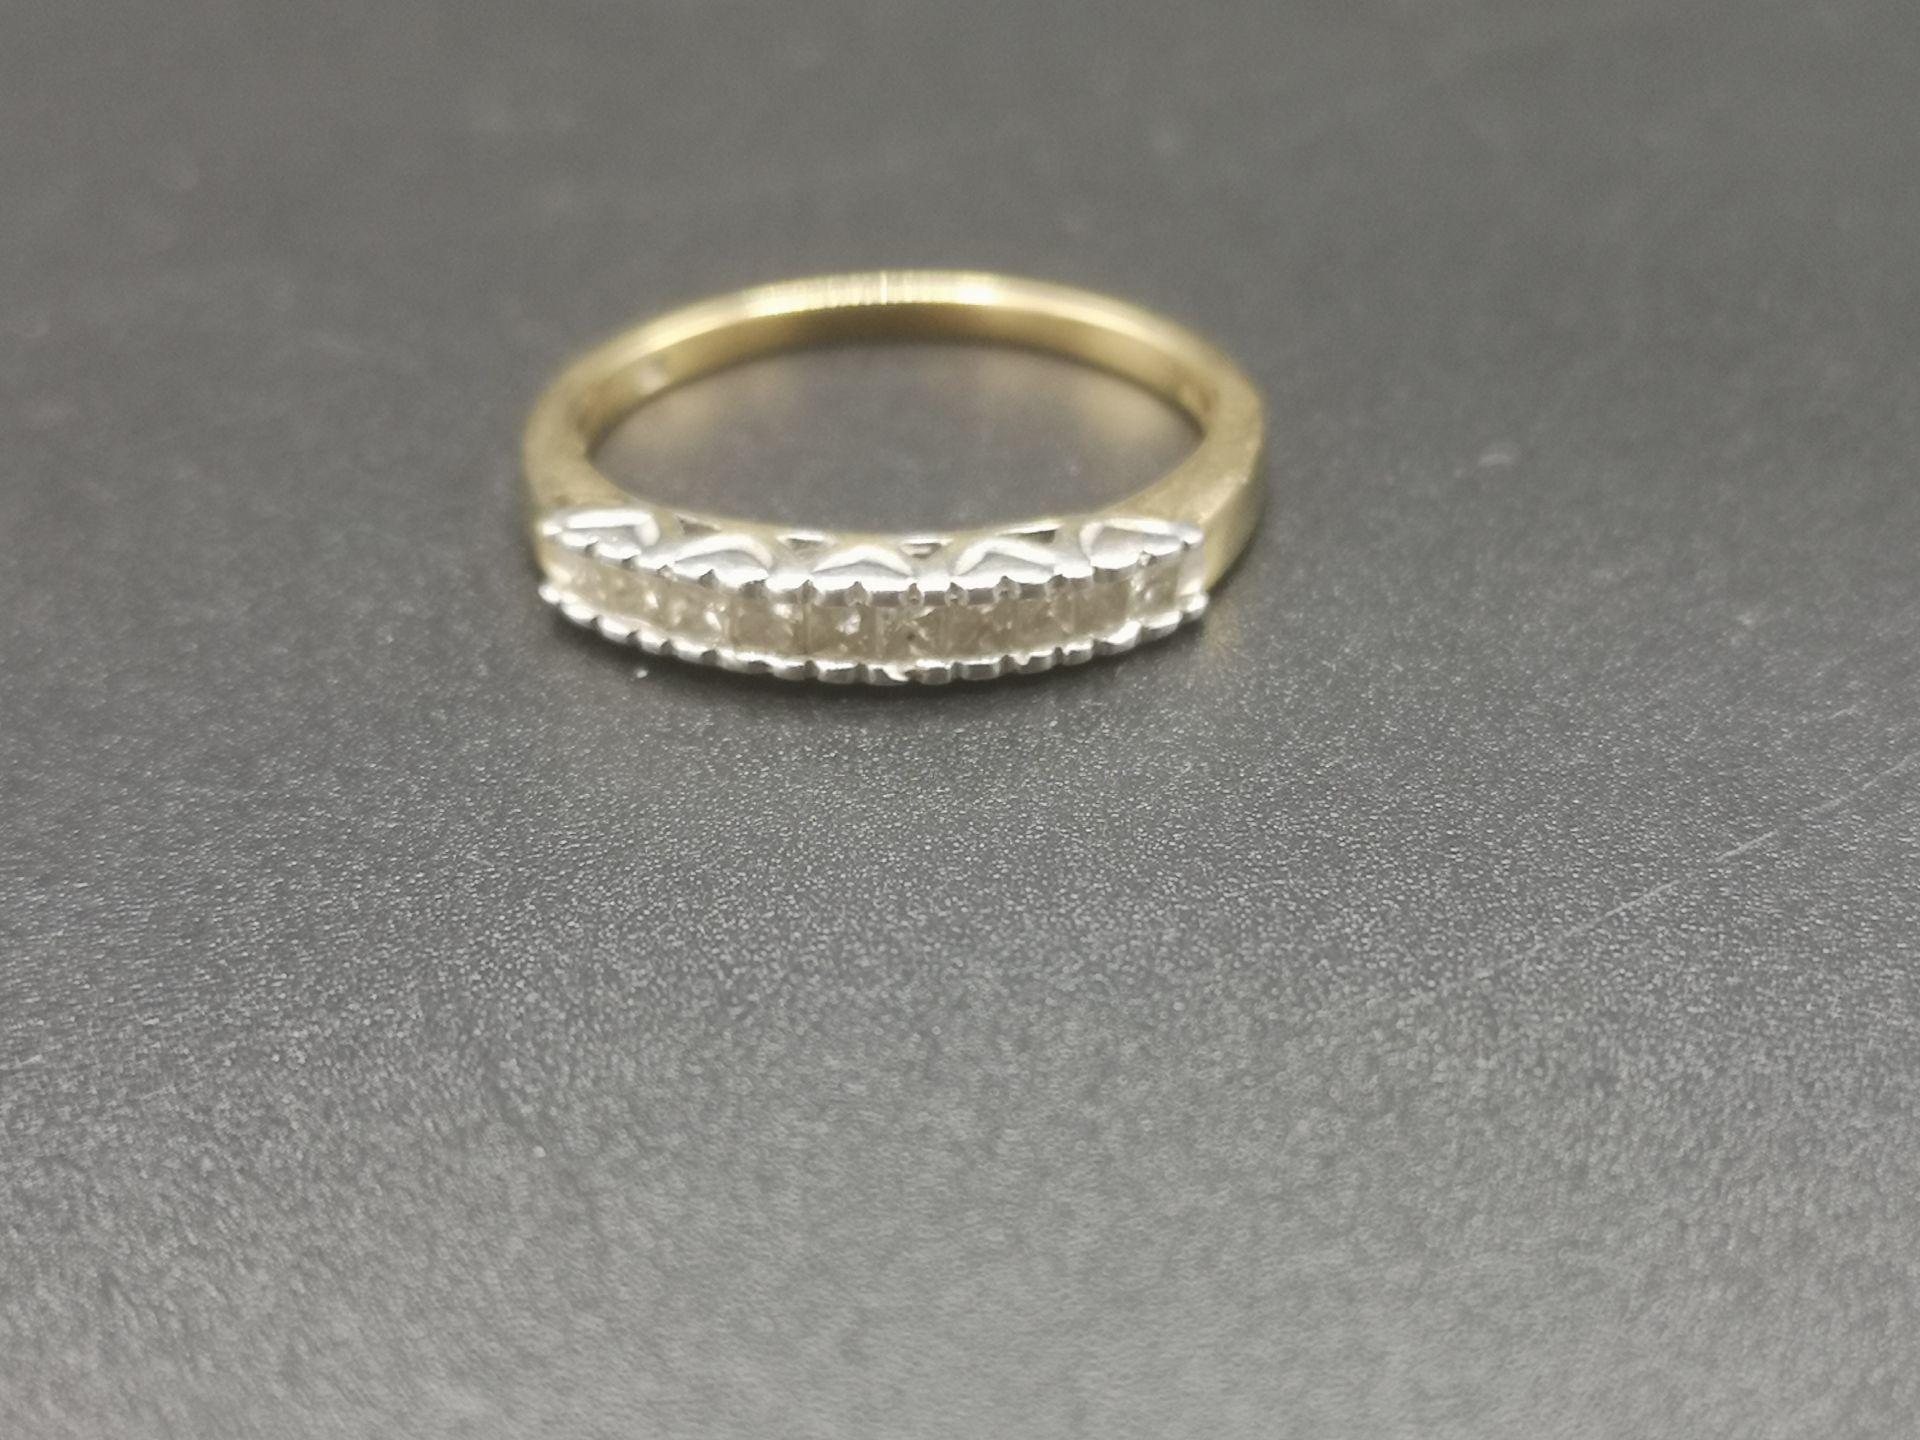 9ct gold ring with channel set diamonds